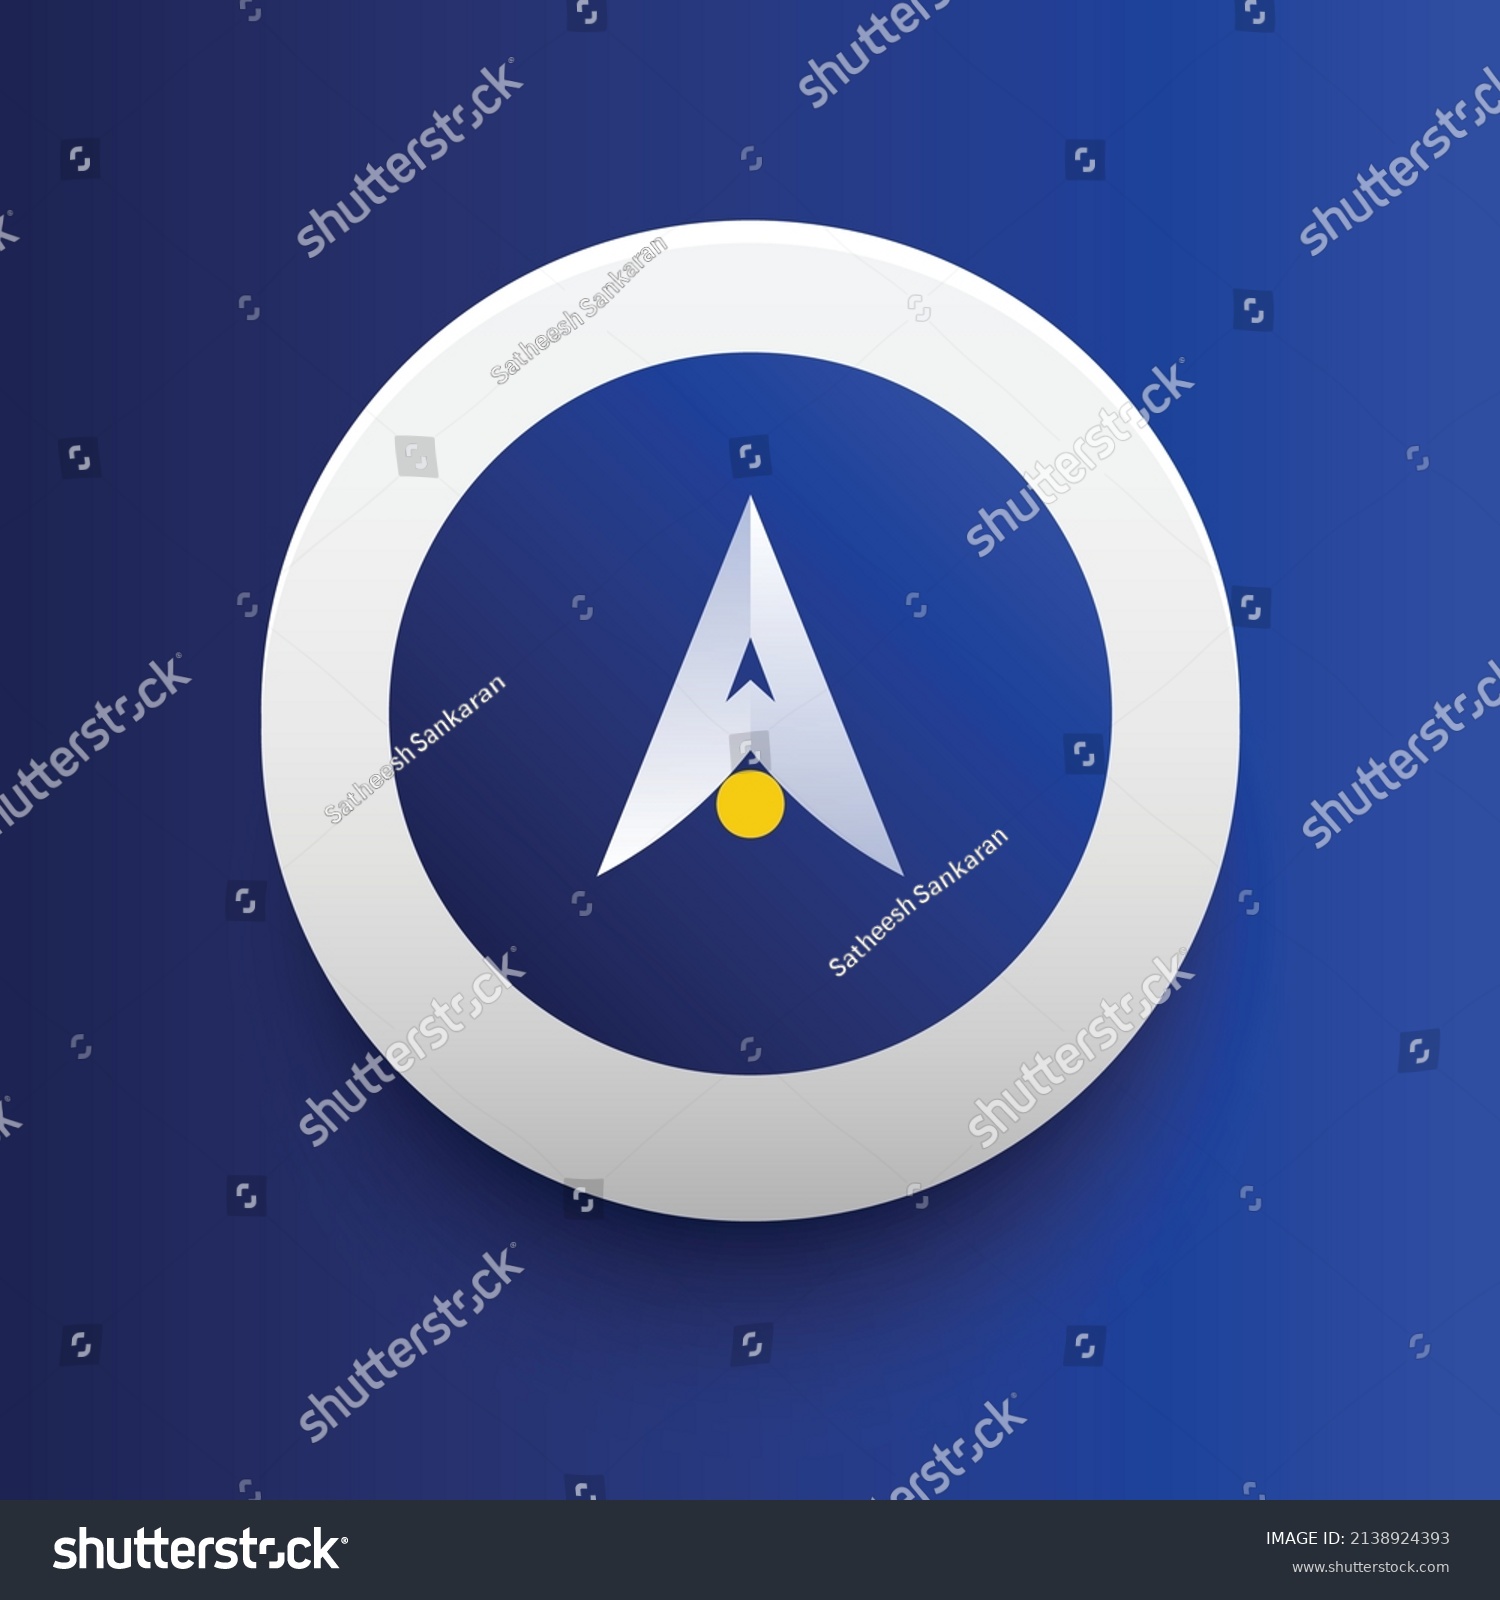 SVG of Blockchain based secure Cryptocurrency coin Alpha Finance Lab (ALPHA) icon isolated on colored background. Digital virtual money tokens. Decentralized finance technology illustration. Altcoin Vector  svg